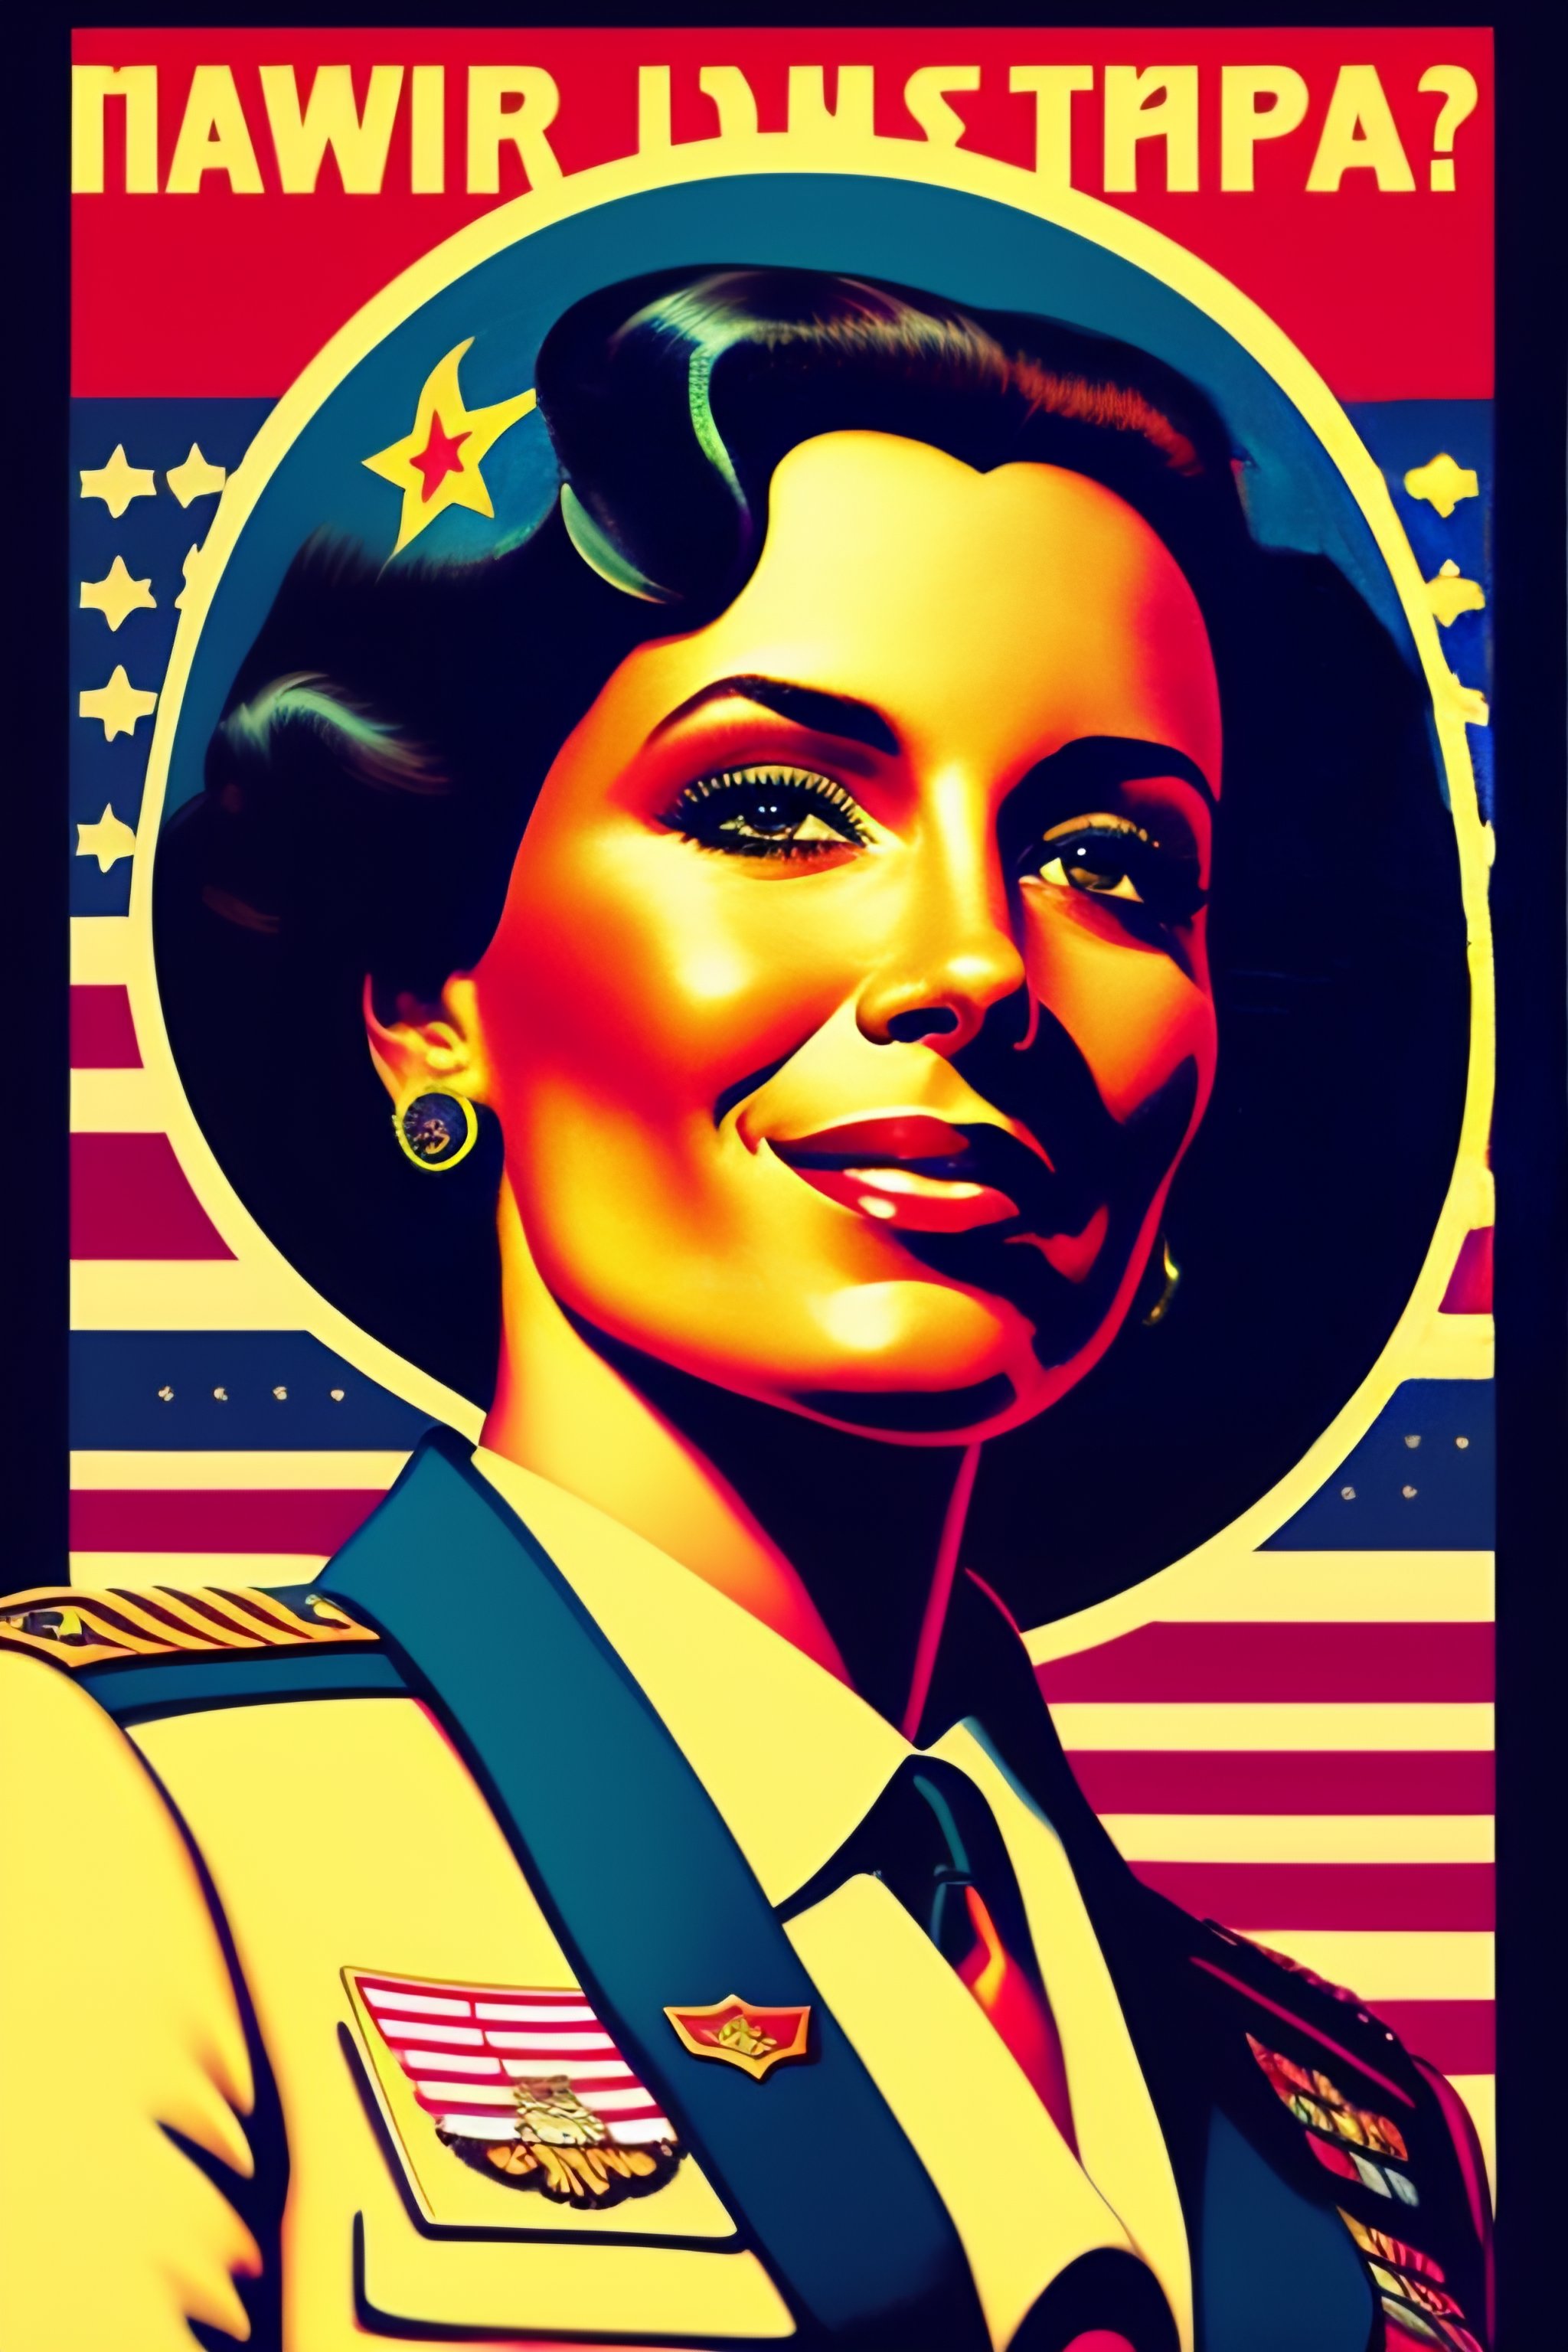 Lexica - Propaganda poster of an US army general as leader of a ...